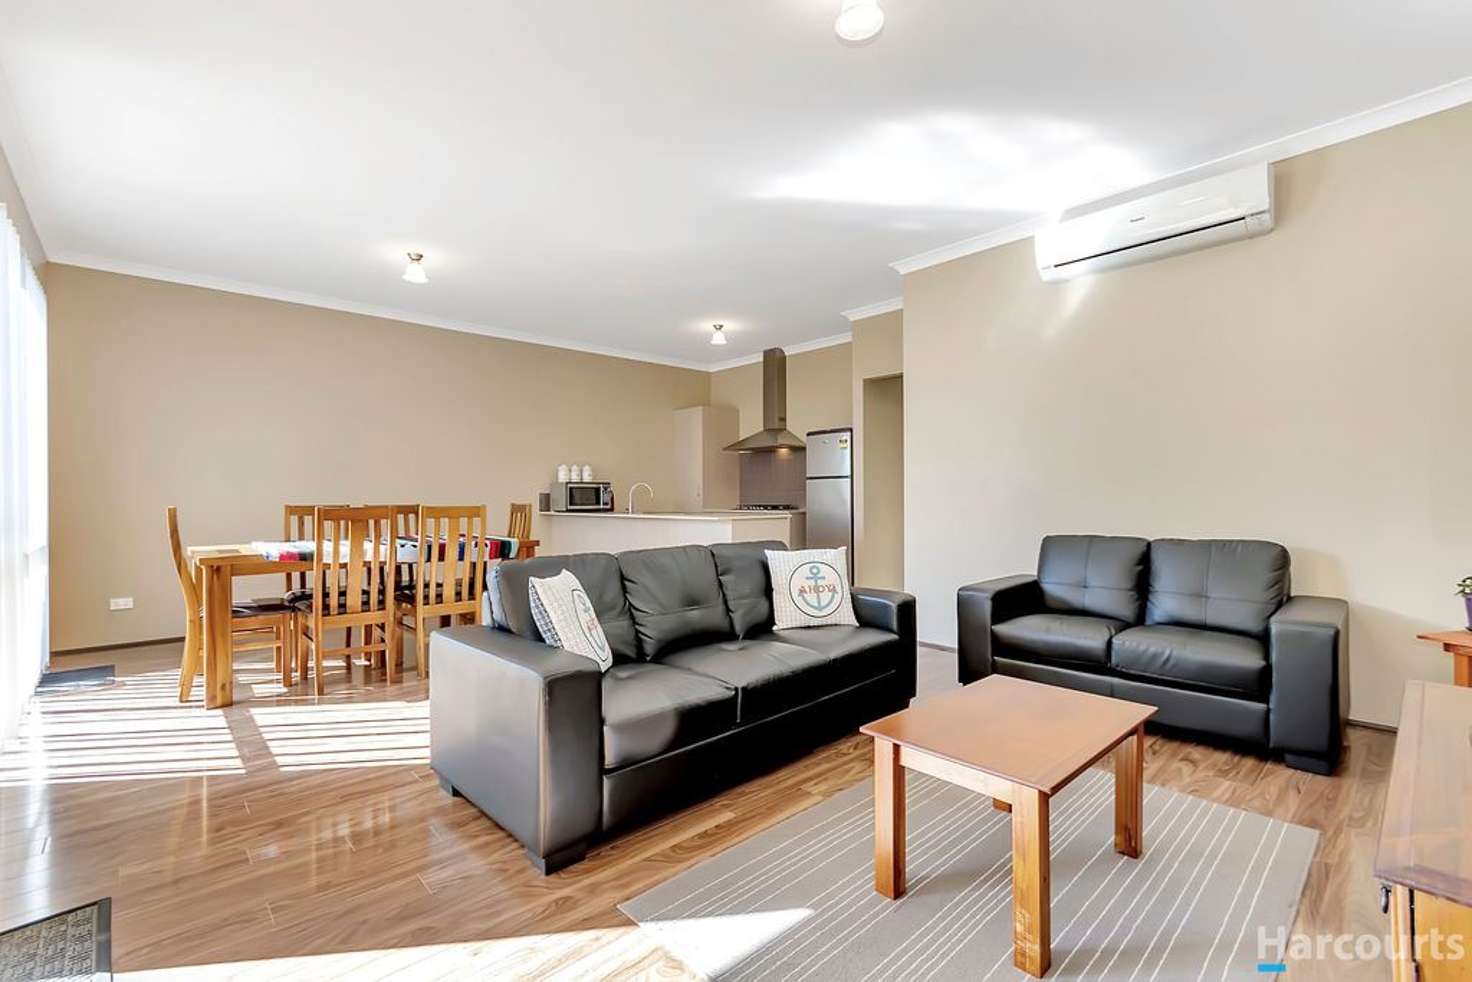 Main view of Homely house listing, 35 Pollock Way, Clarkson WA 6030